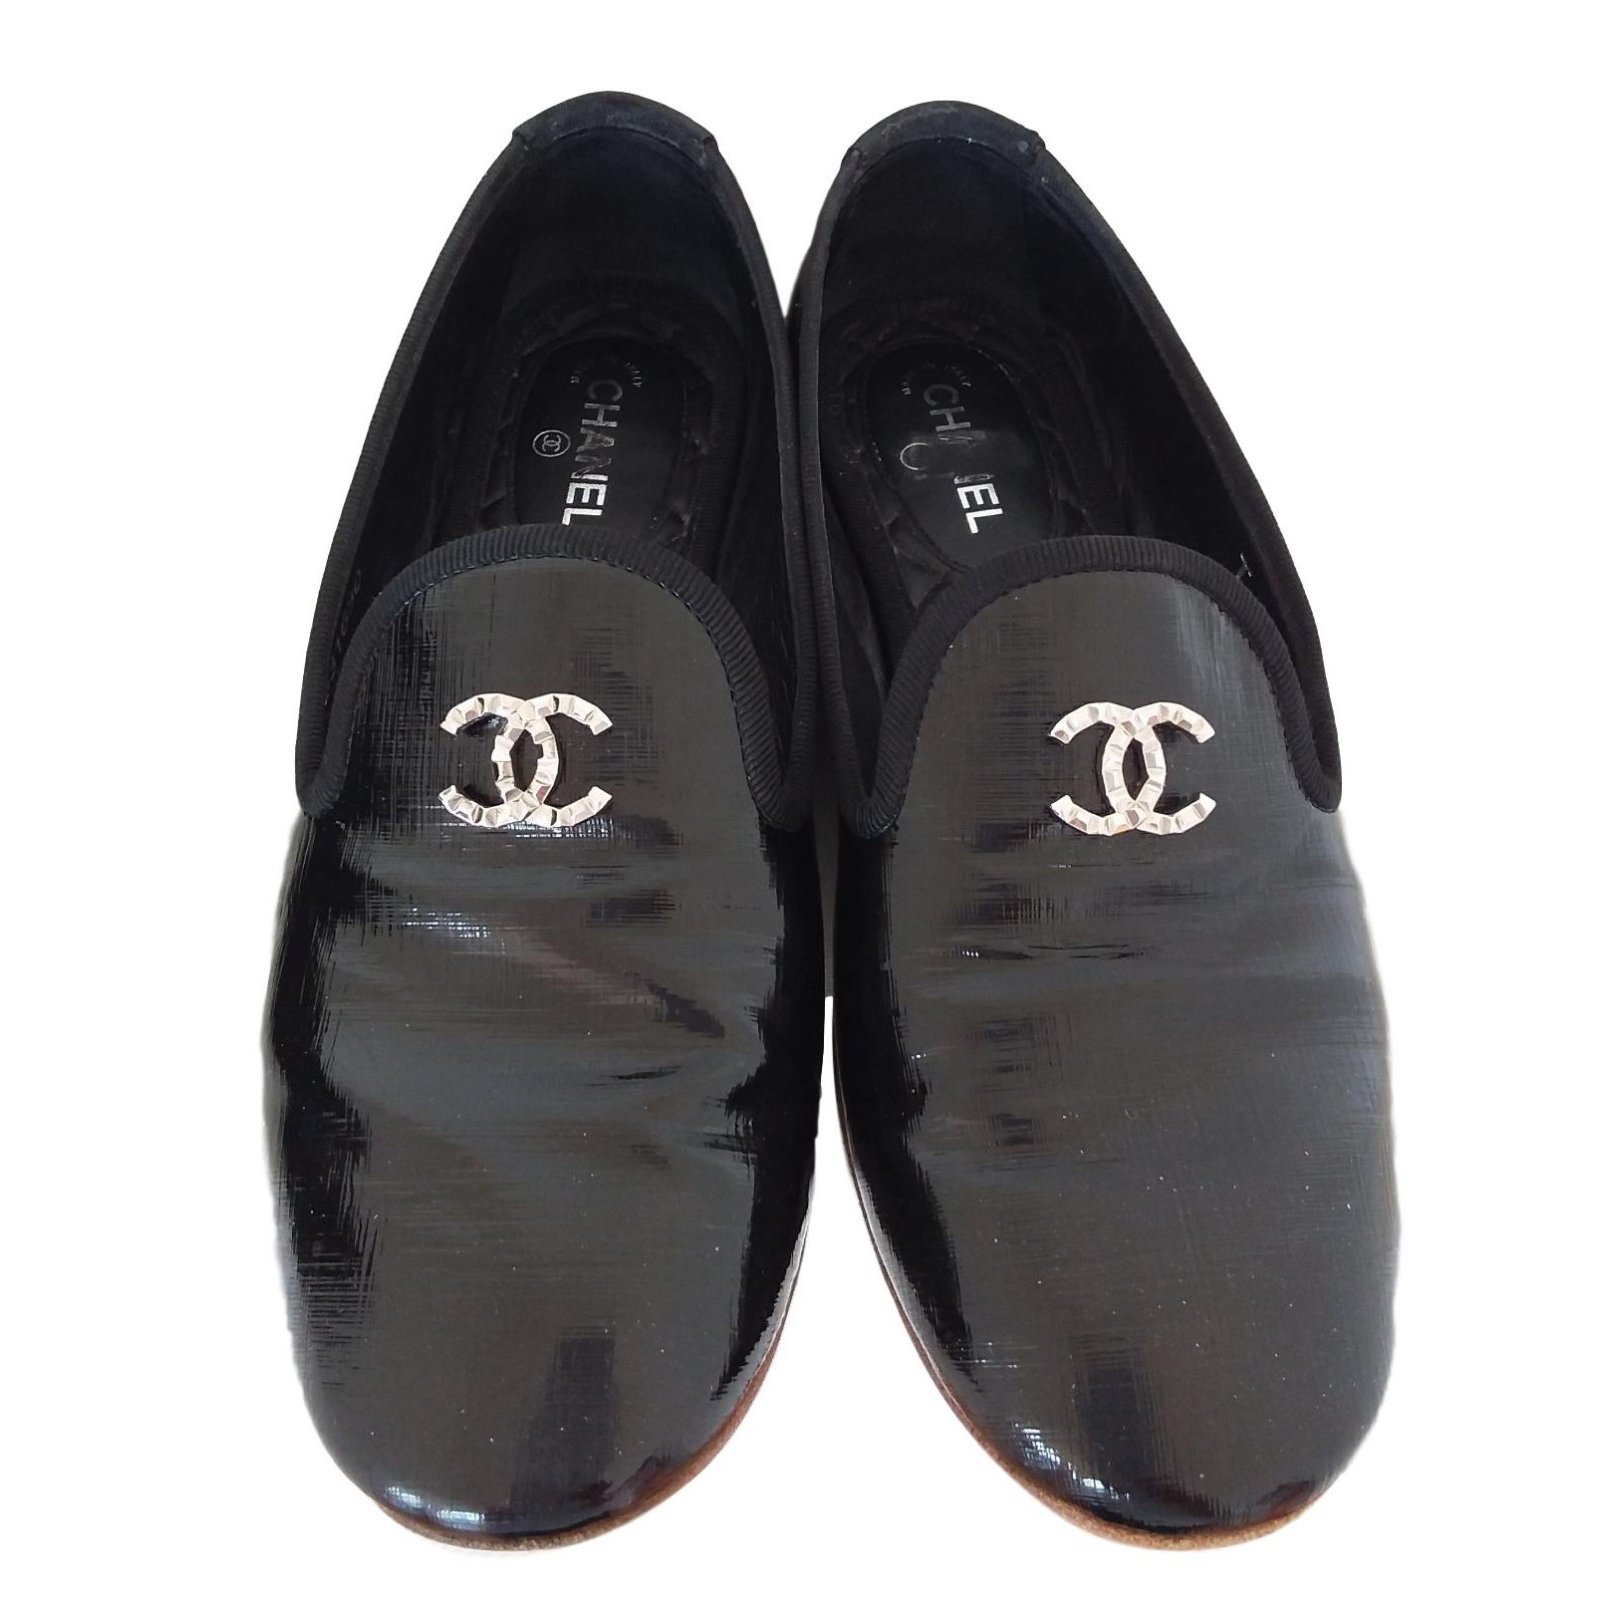 chanel black loafers